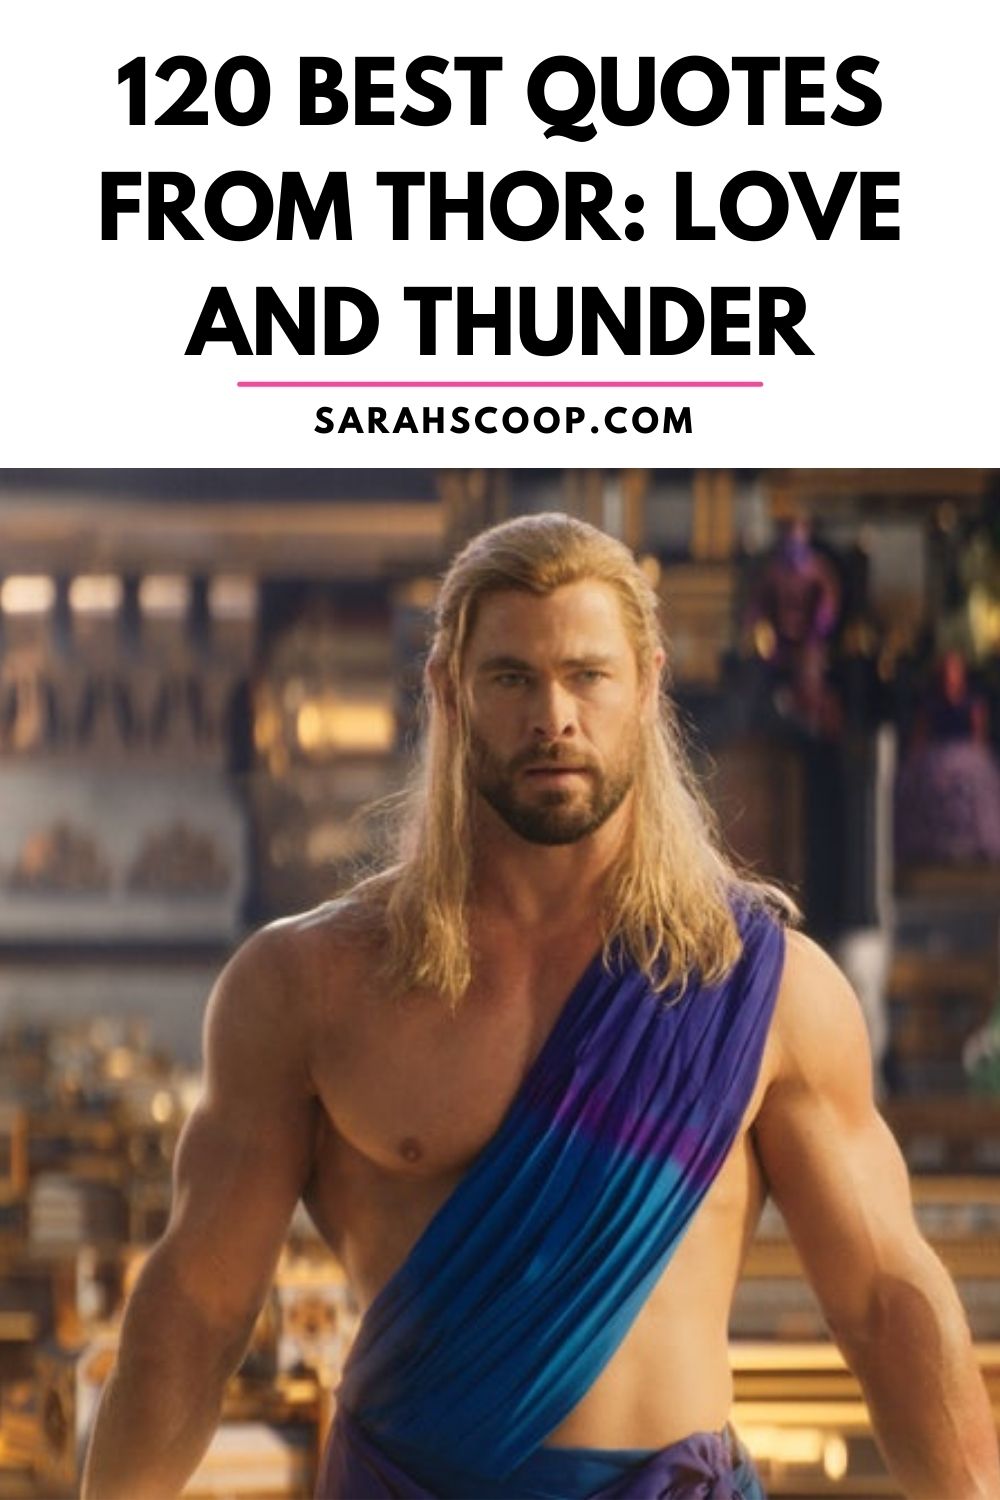 120 Best Quotes from Thor: Love and Thunder - Sarah Scoop